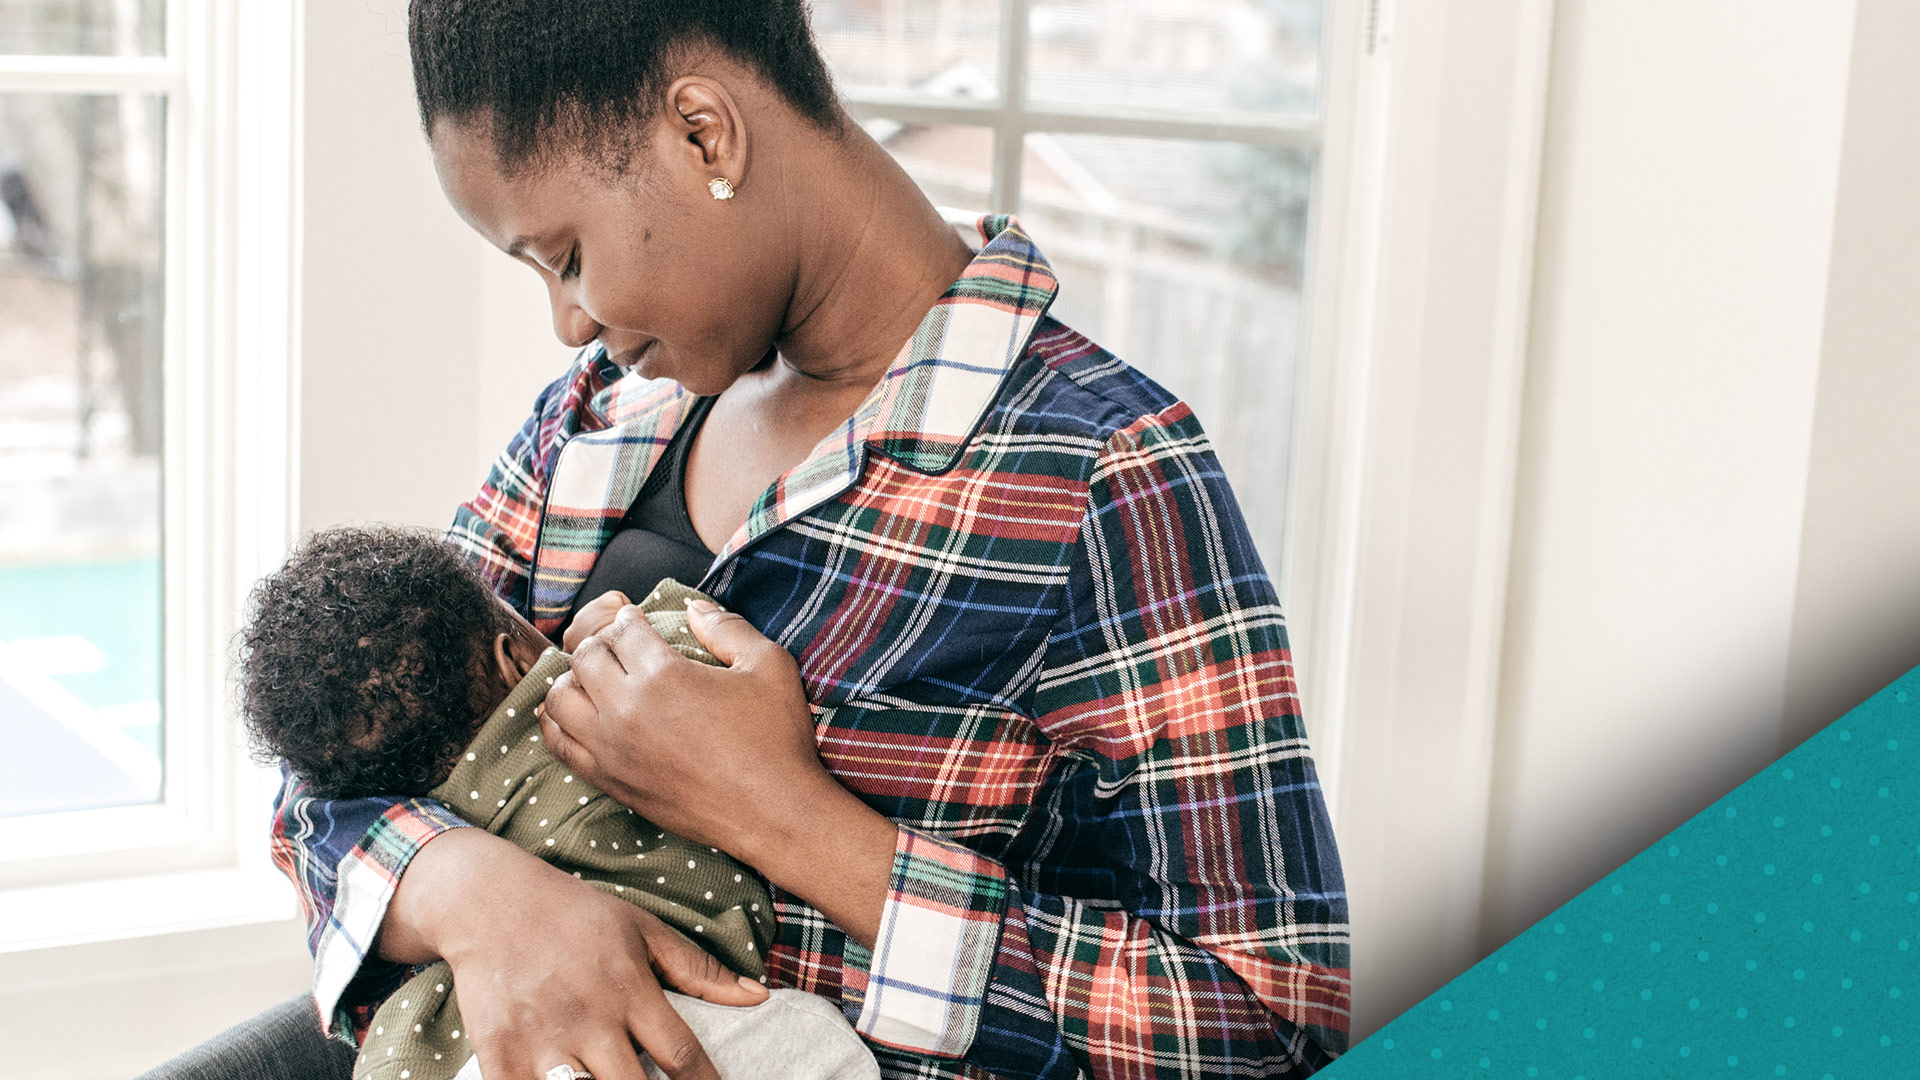 How long does breastfeeding take? What should you do if you’re sick? Get expert answers to some common questions.